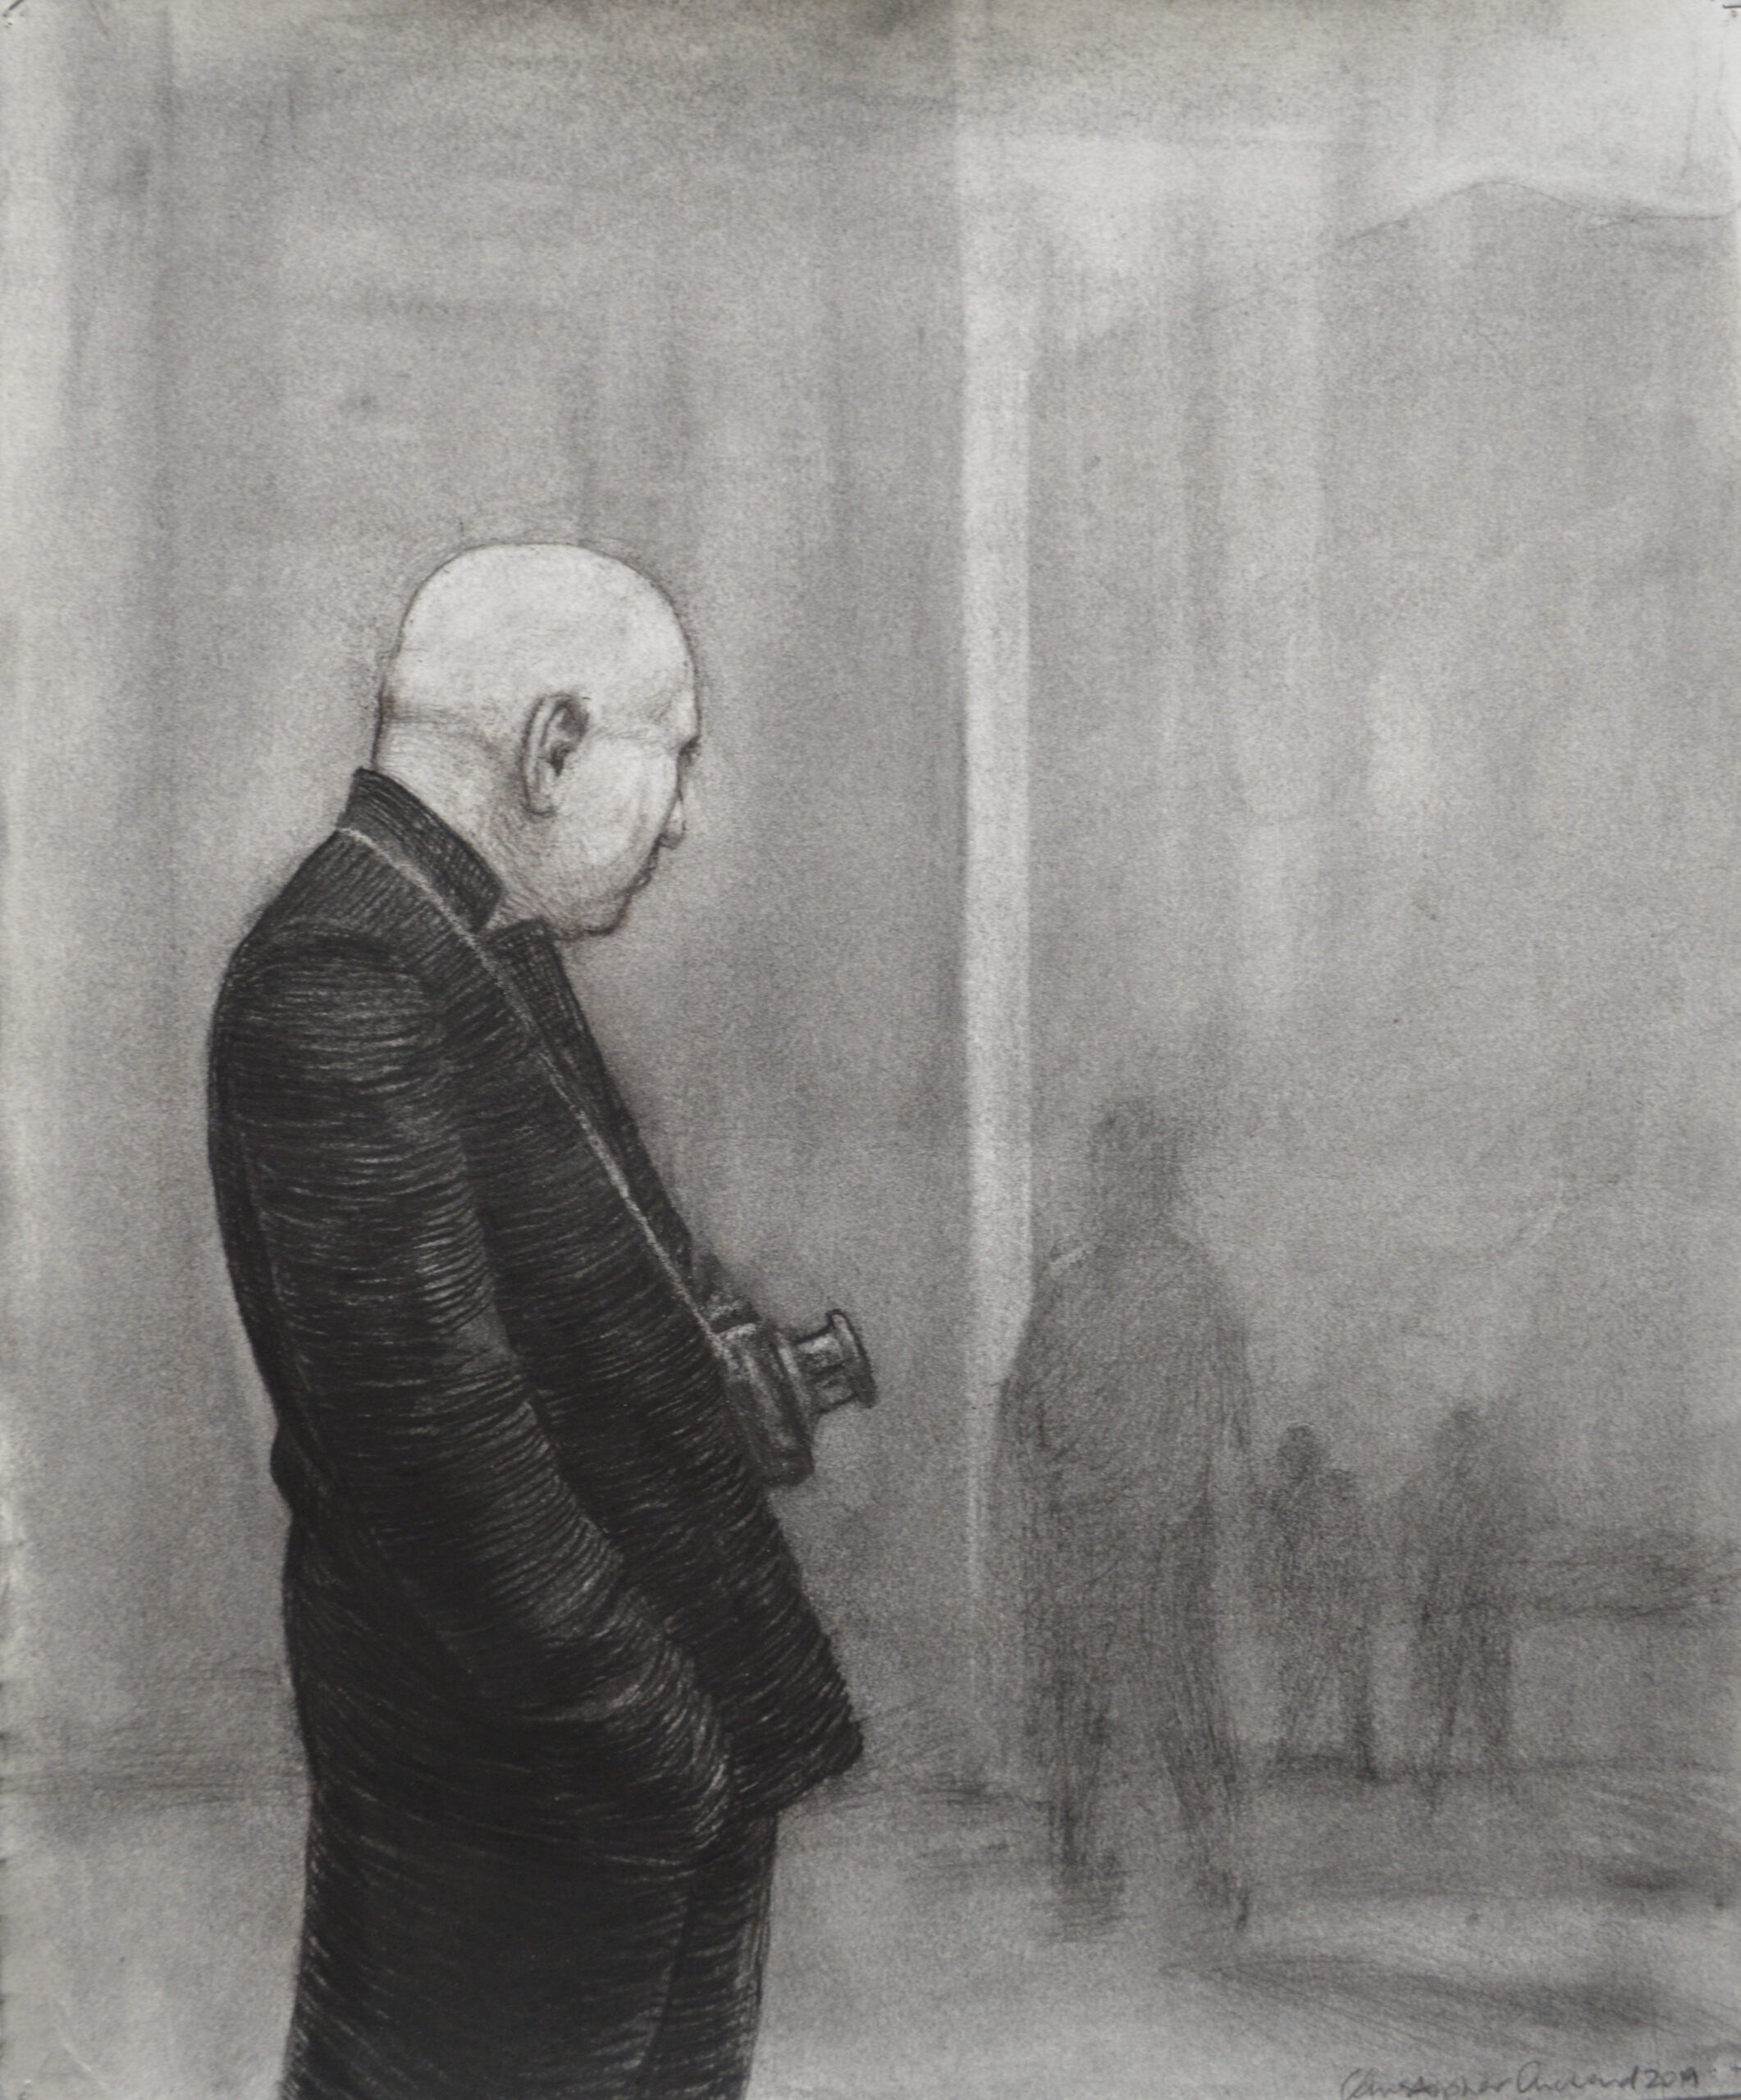 Orchard_The Journalist_Charcoal on paper_49.5x41cm